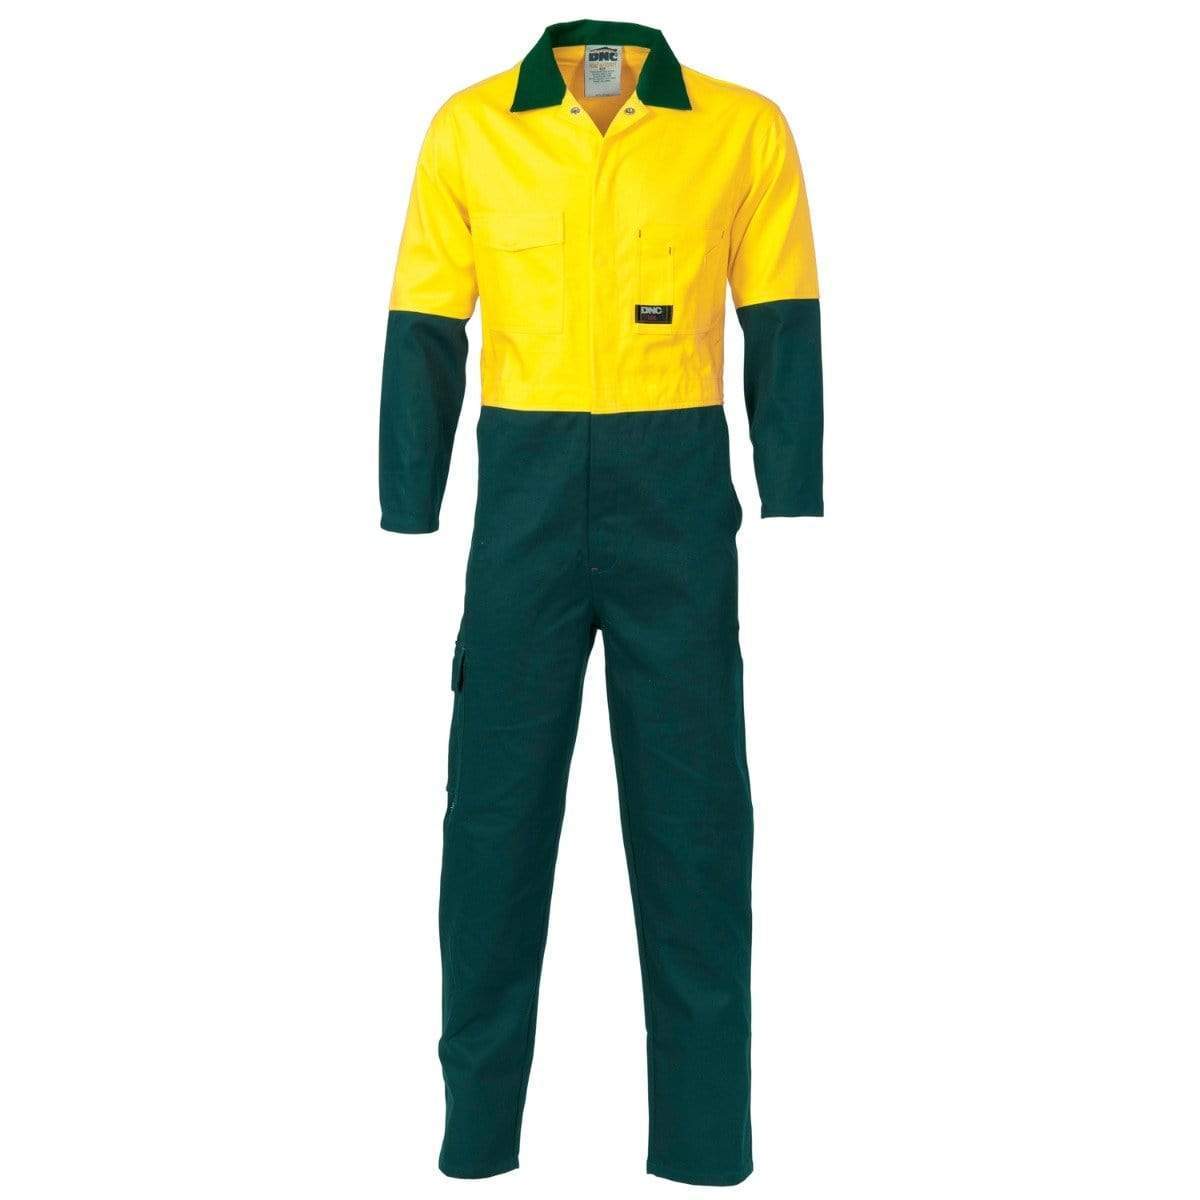 DNC Workwear Work Wear Yellow/Bottle Green / 77R DNC WORKWEAR Hi-Vis Two-Tone Cotton Coverall 3851